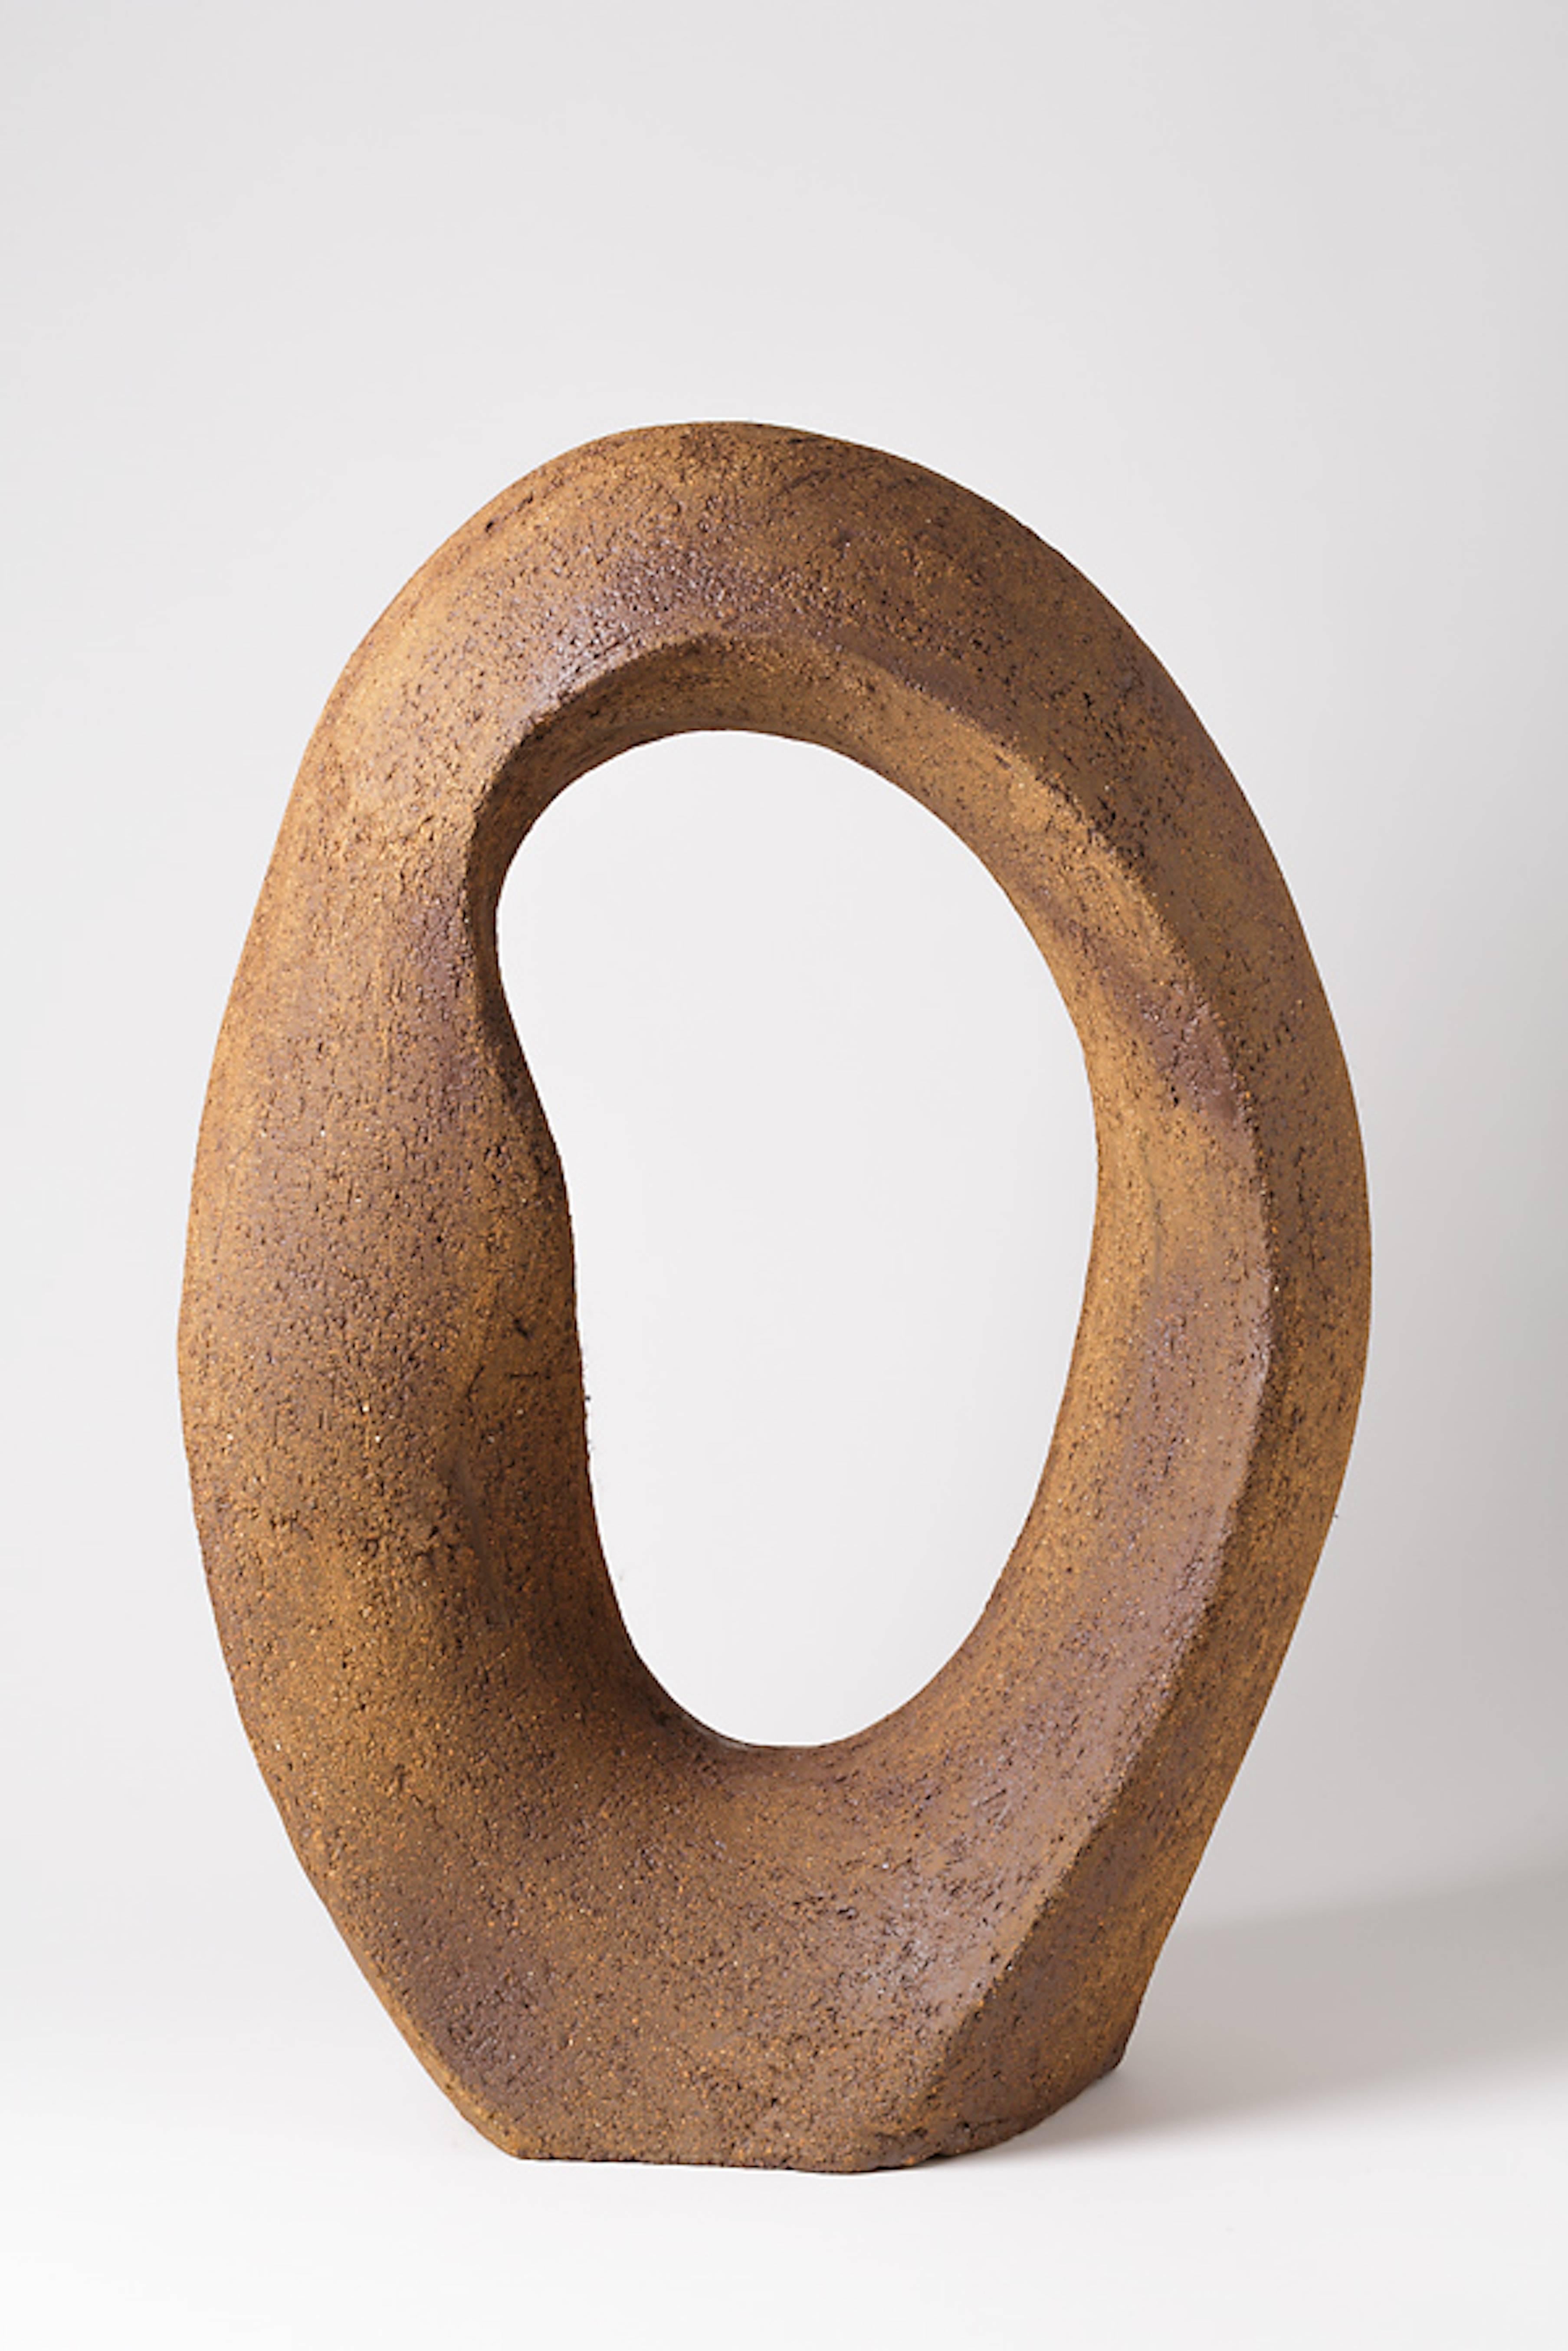 An important stoneware sculpture by Tim Orr.
Handwritten signature at the base.
Circa 1970-1980.

One pair is avaible.